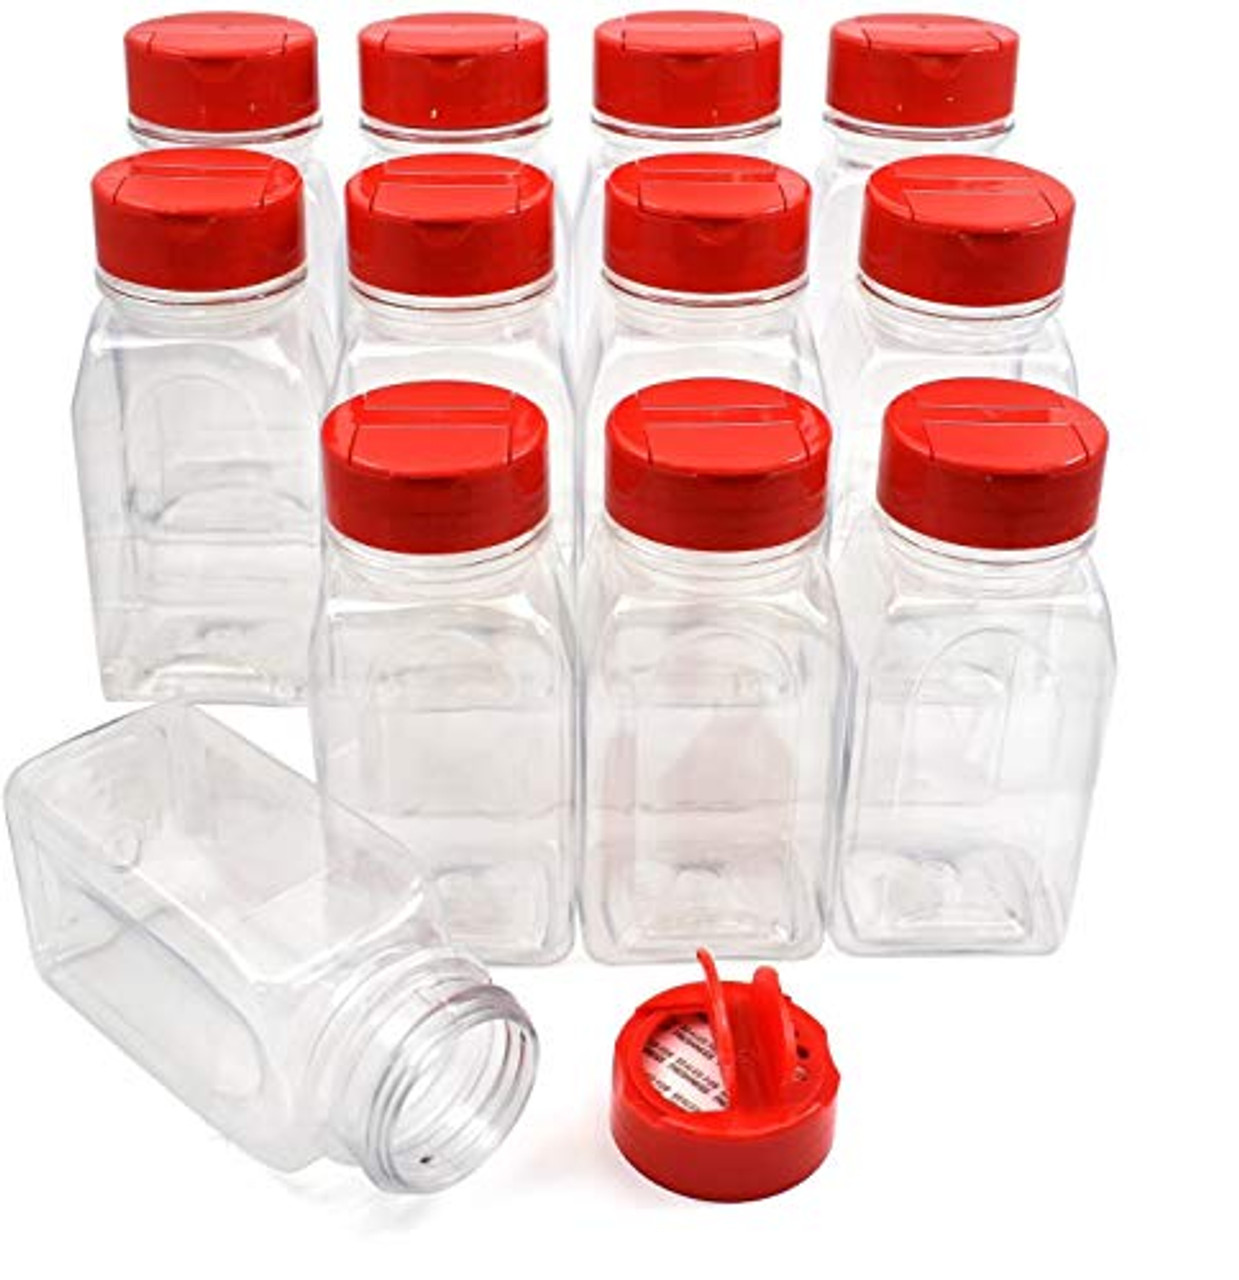 RoyalHouse - 12 PACK - 9.5 Oz with Red Cap - Plastic Jars Bottles  Containers - Perfect for Storing Spice, Herbs and Powders - Lined Cap -  Safe Plastic